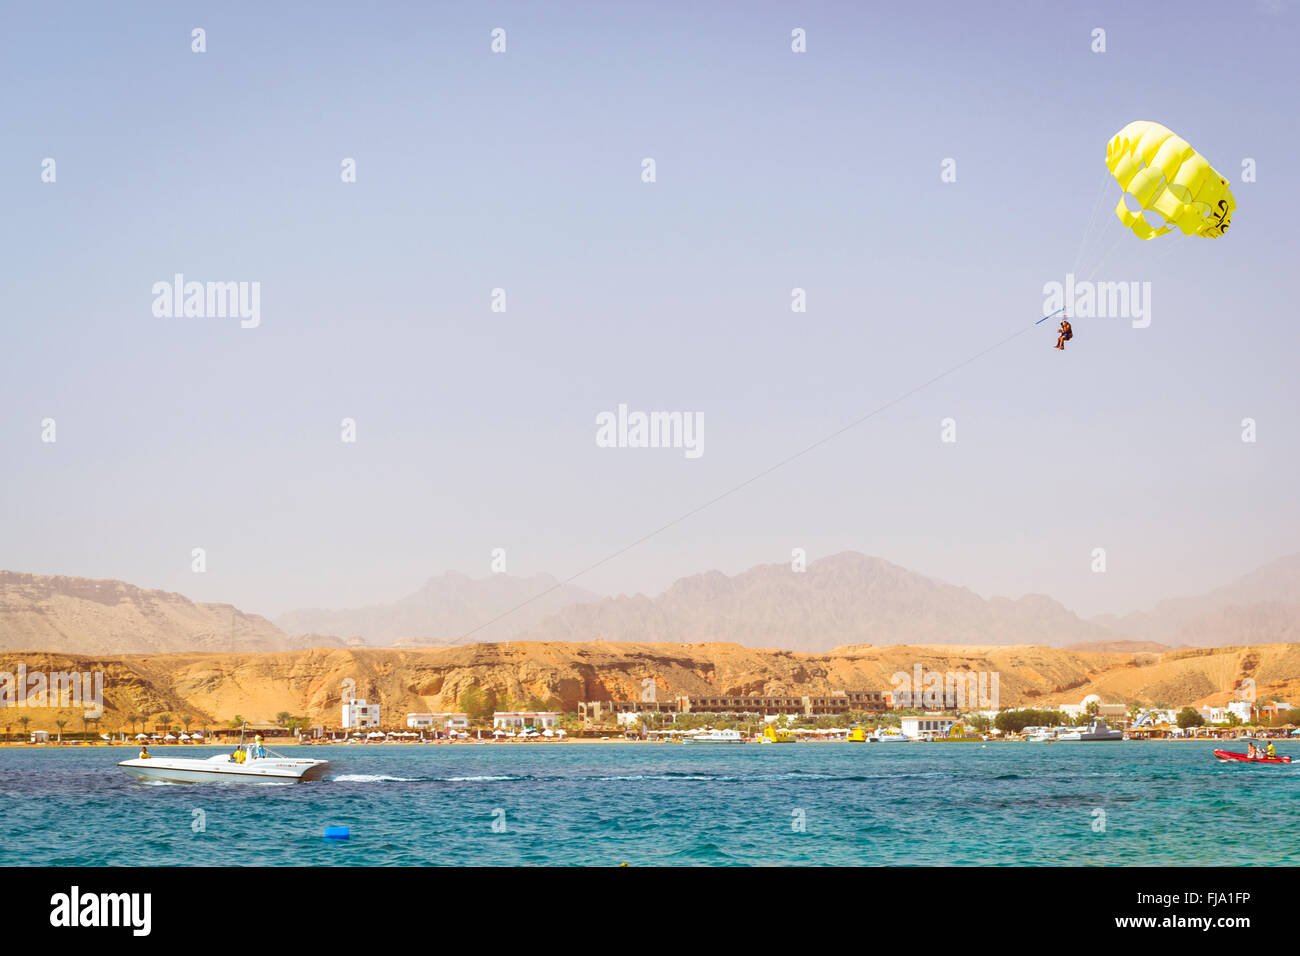 SHARM EL SHEIKH, EGYPT - FEBRUARY 23, 2014: Parachuting over a sea, towing by a boat: happy couple is flying on a parachute Stock Photo